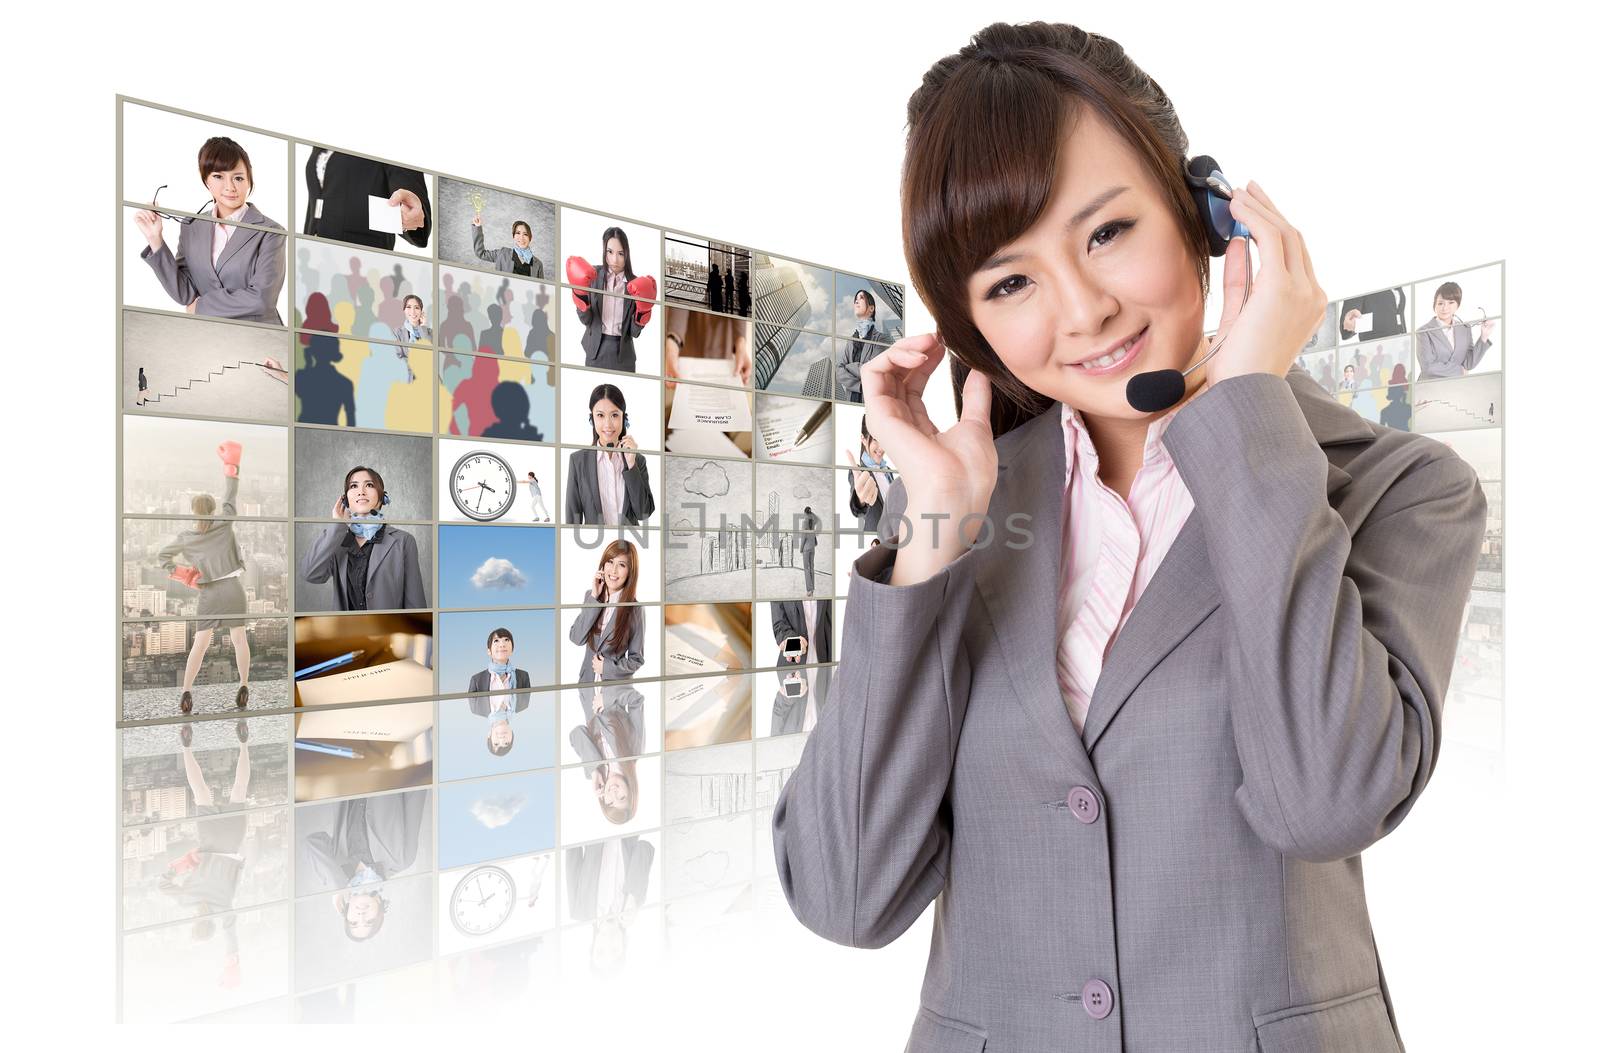 Business woman with headphone standing in front of TV screen wall.